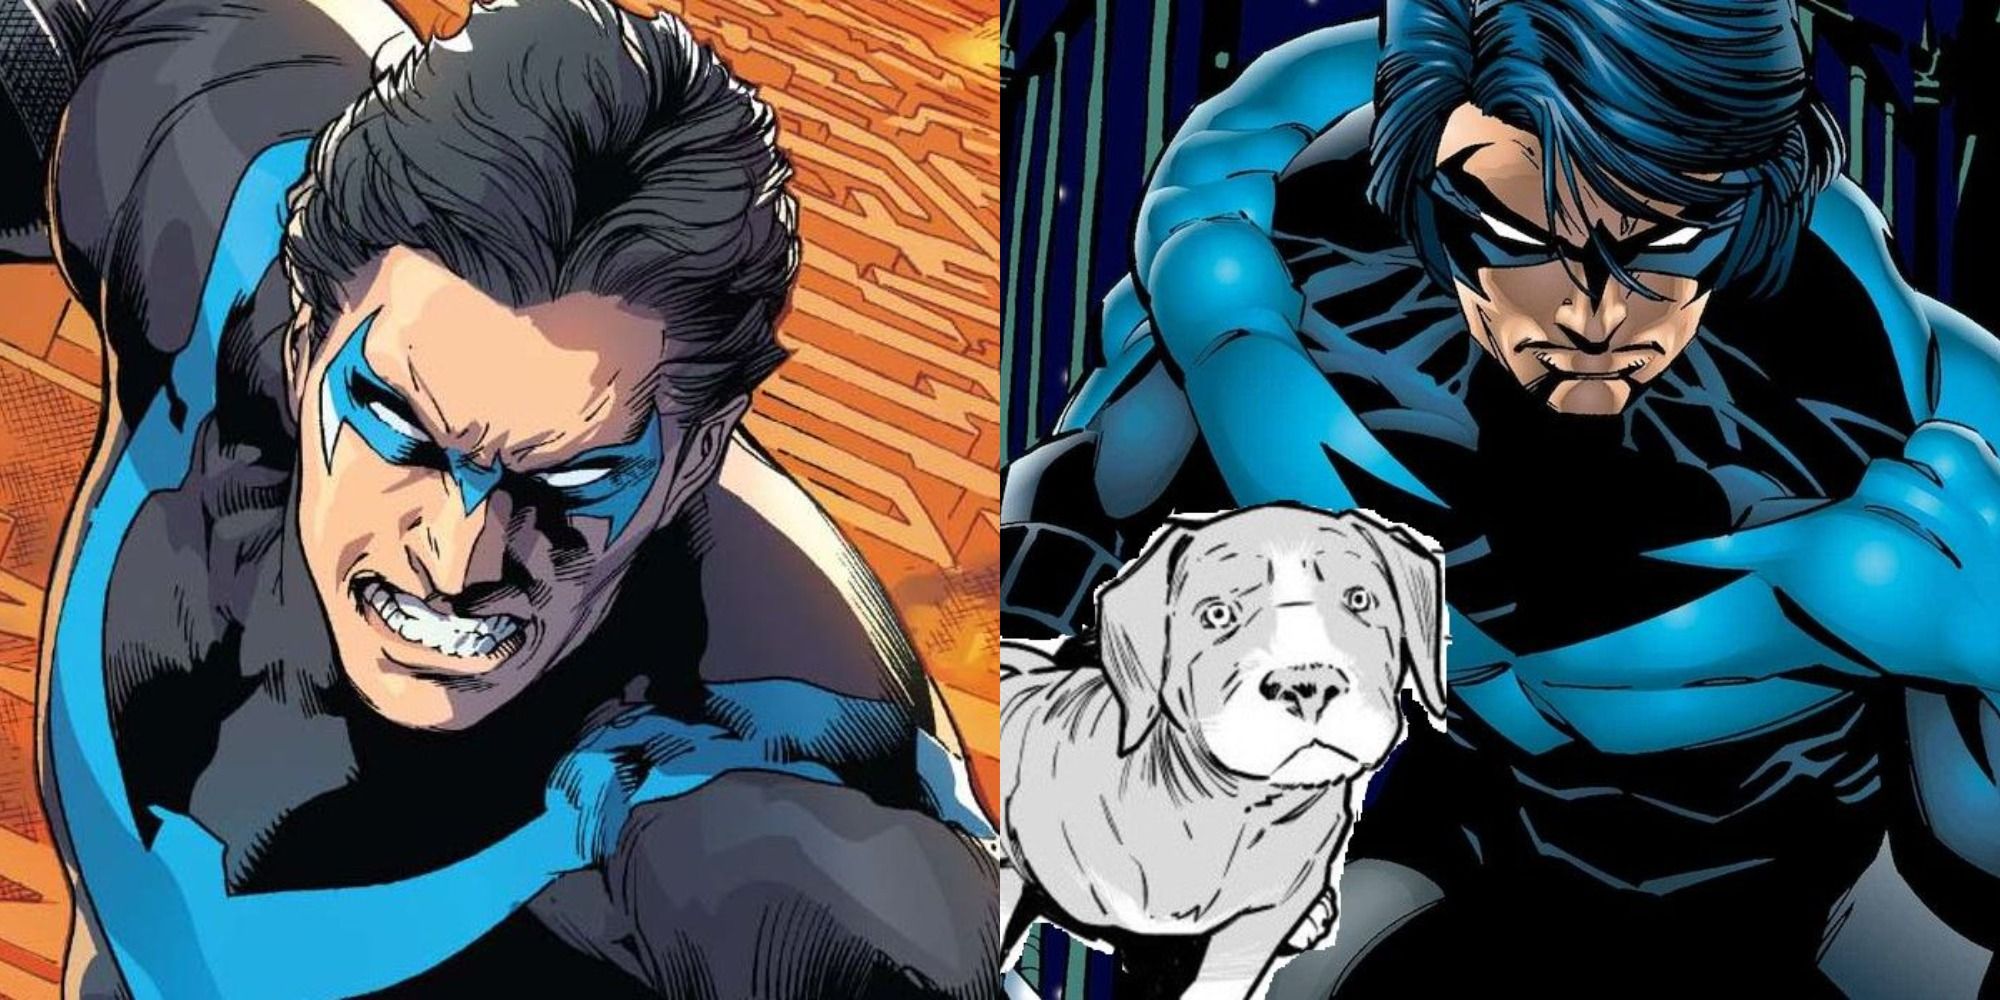 10 Ways Nightwing Is DCs Most Wholesome Hero